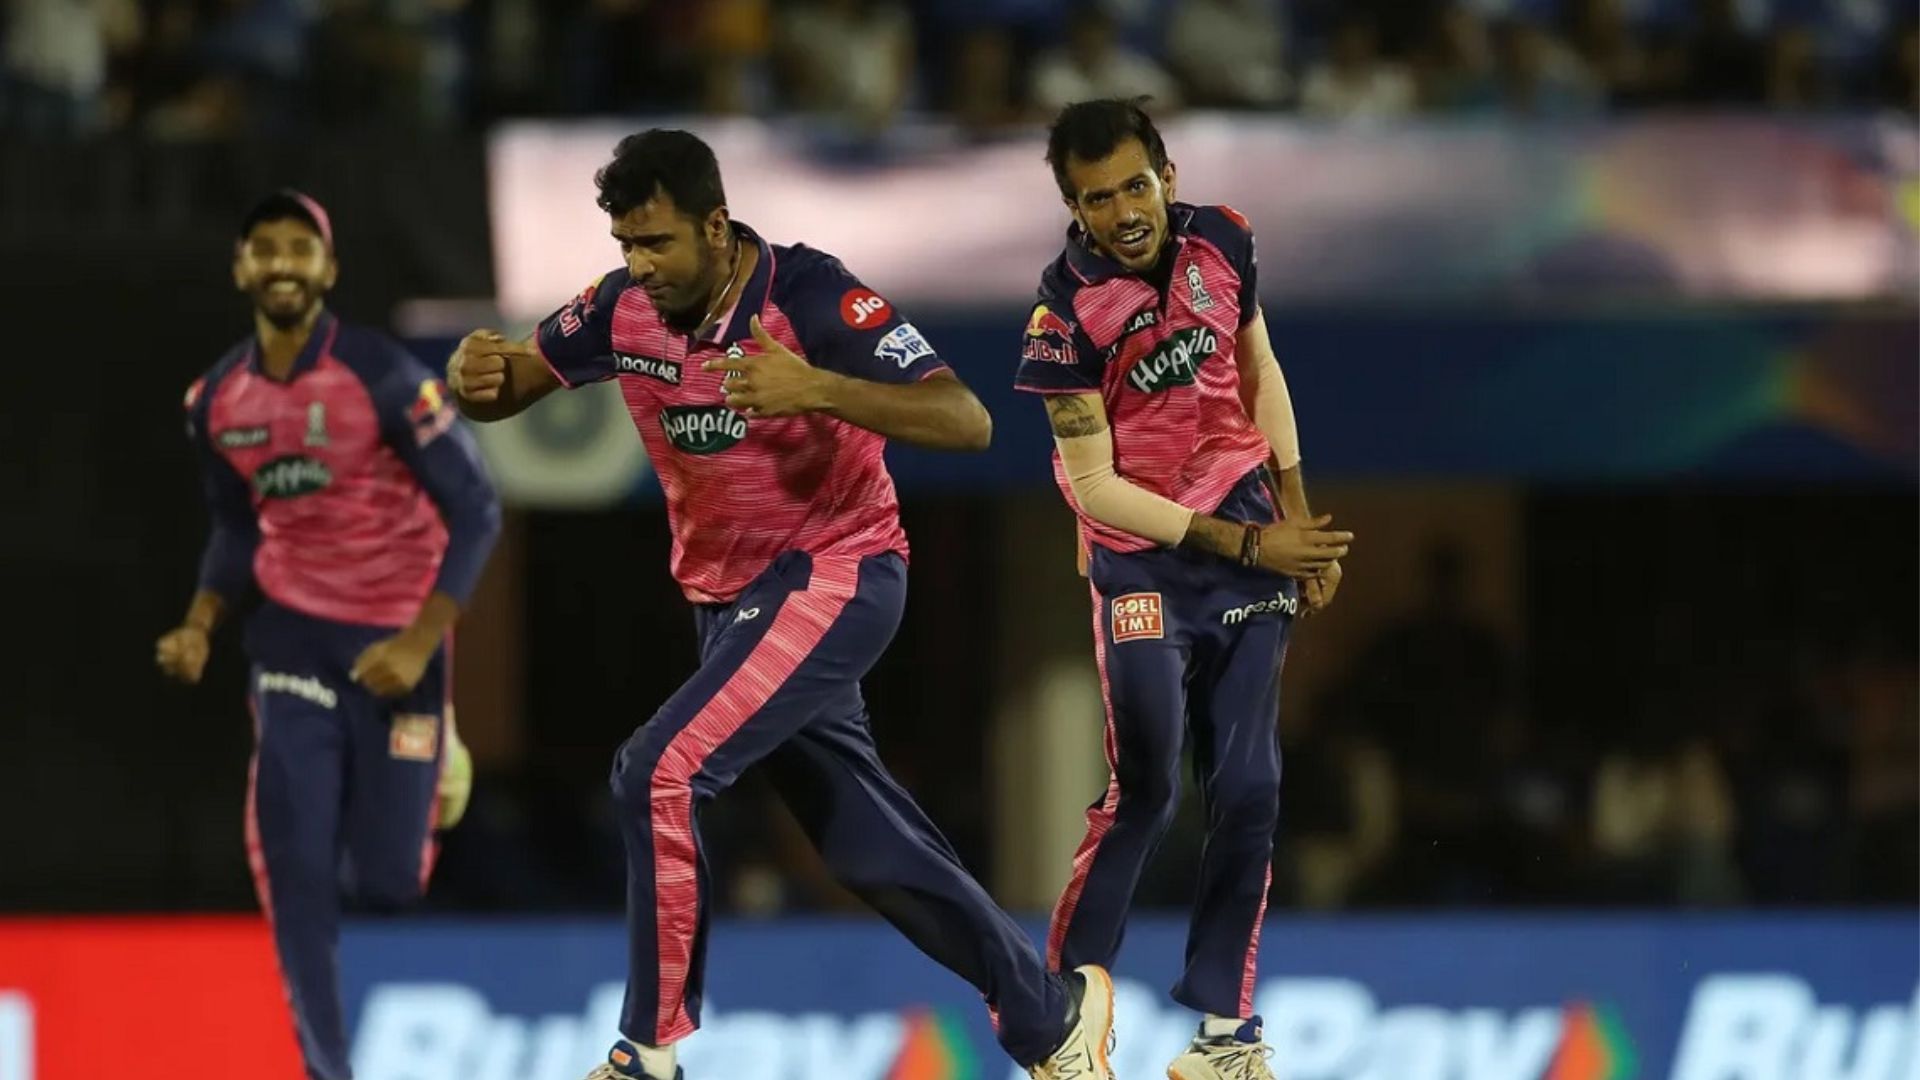 Ashwin and Chahal have been a deadly combination for the Rajasthan Royals.